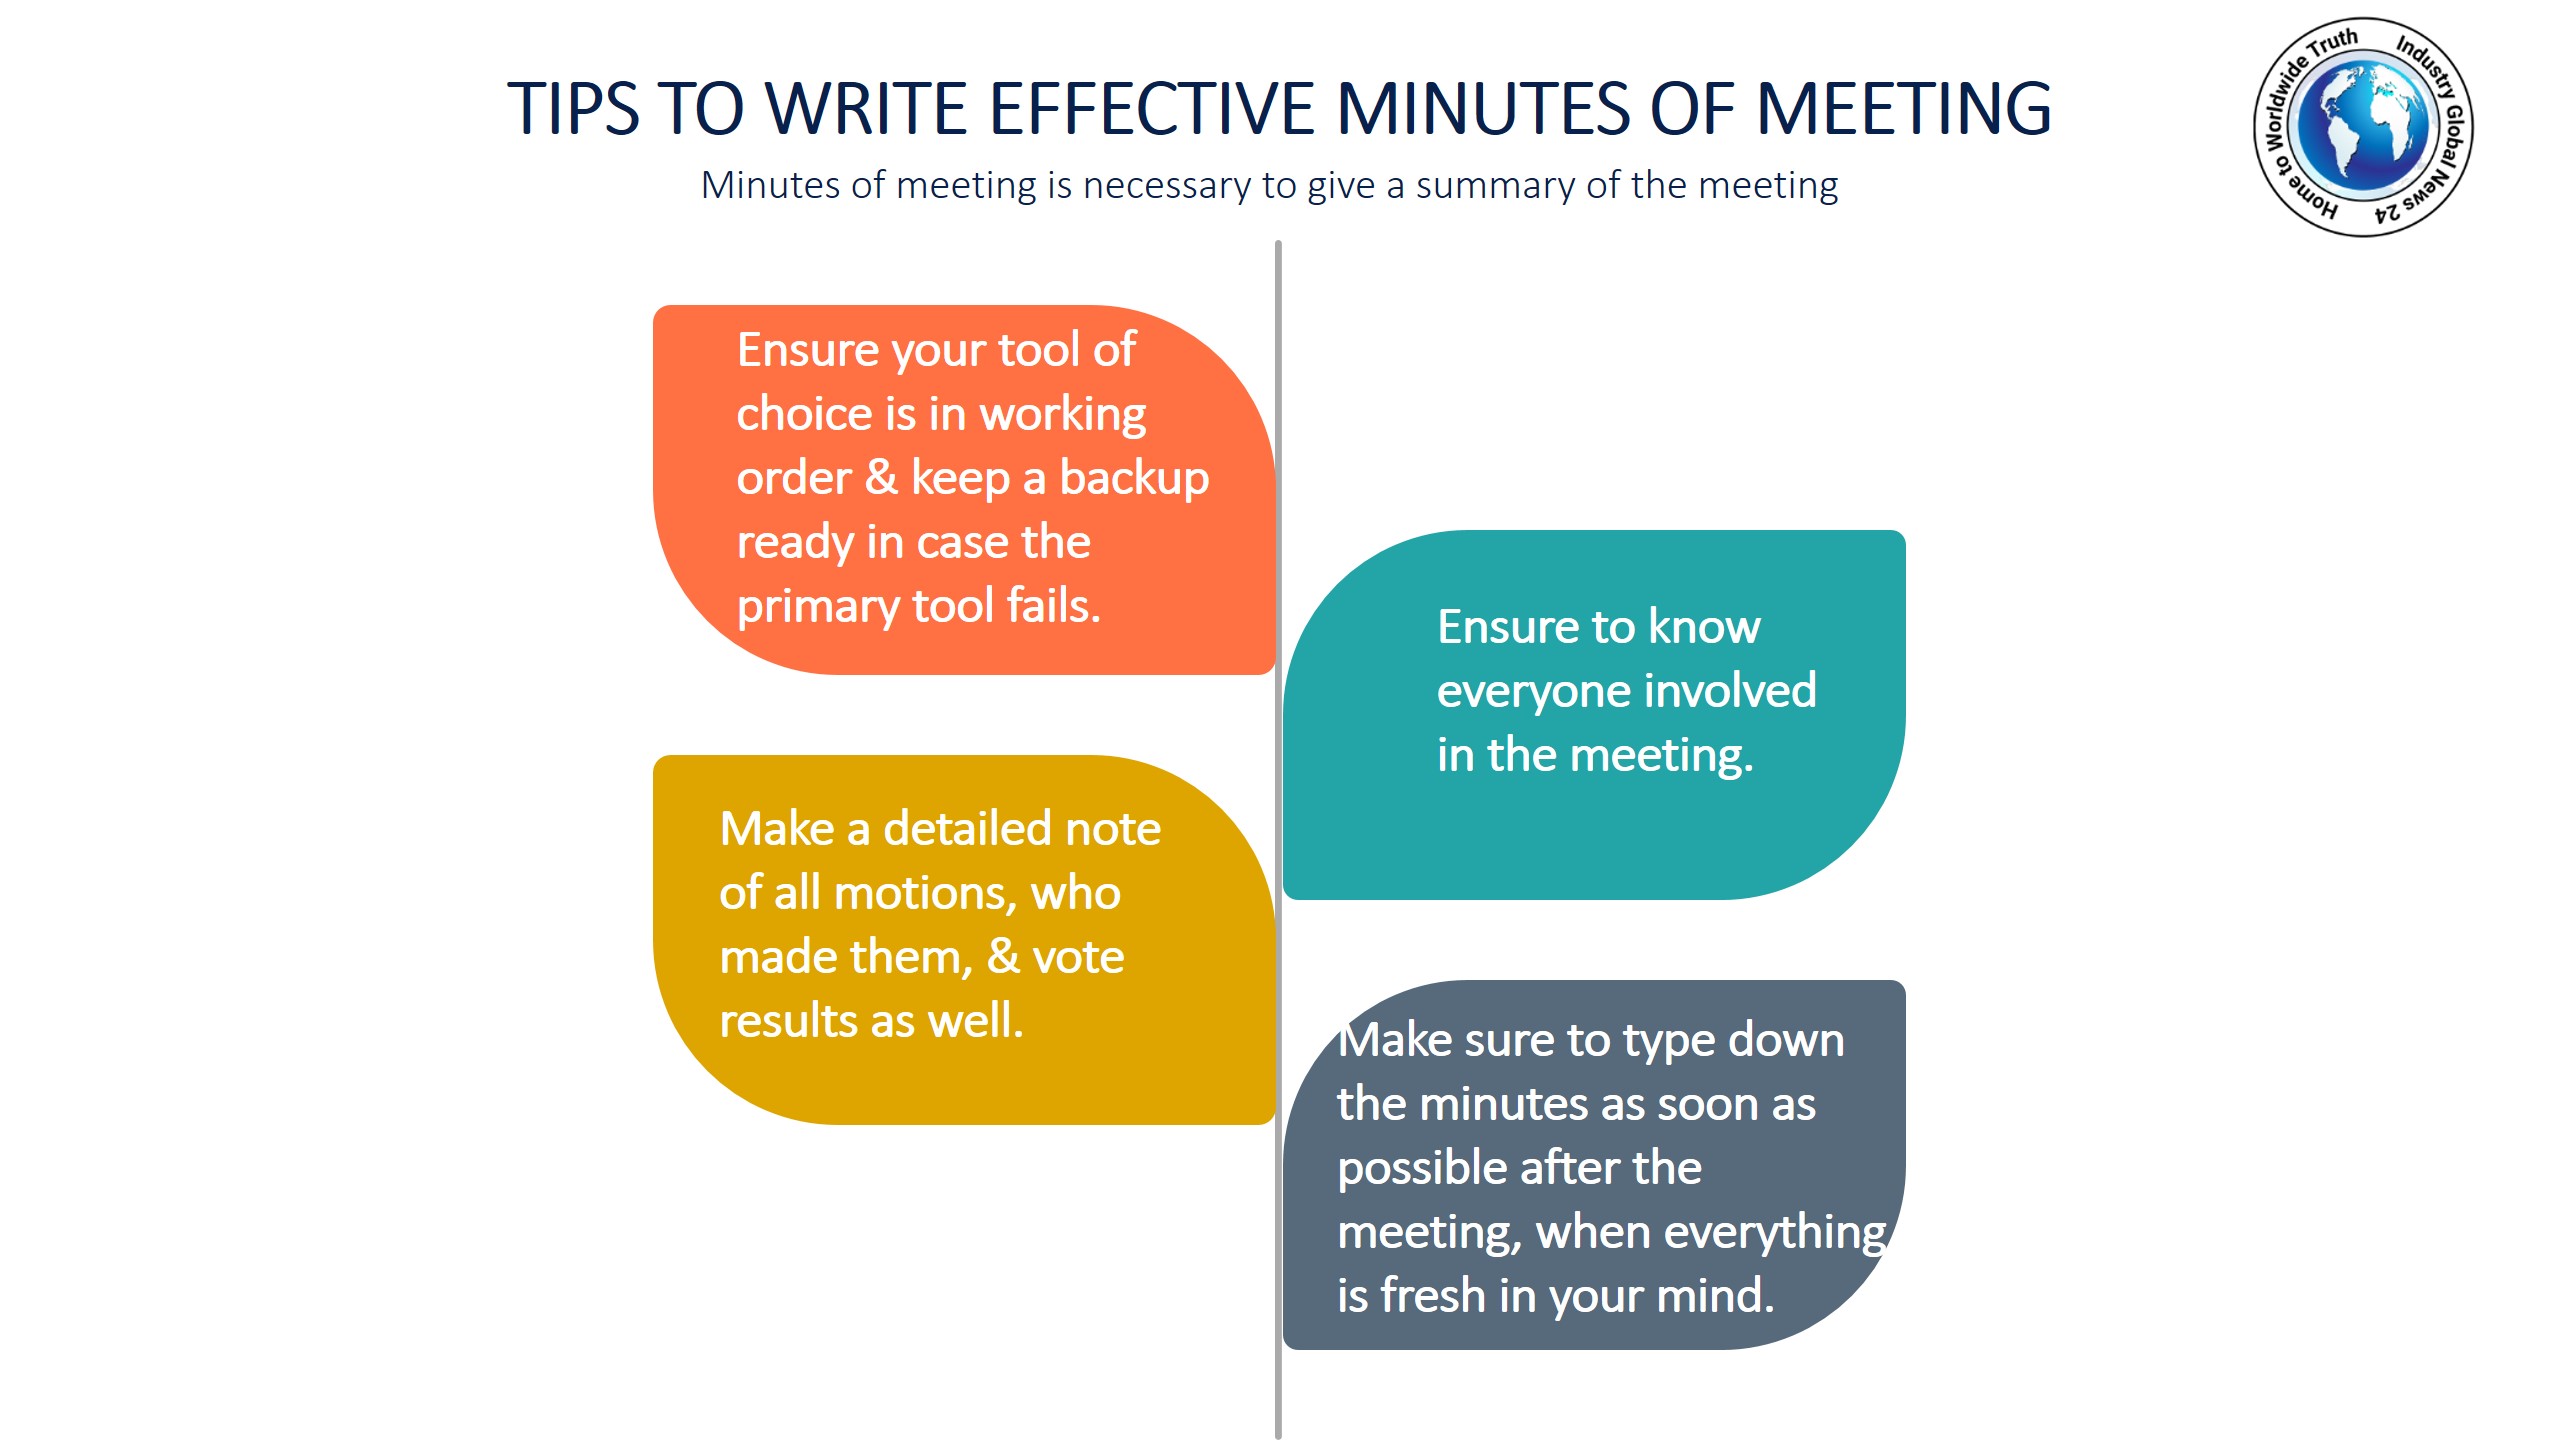 Tips to write effective minutes of meeting